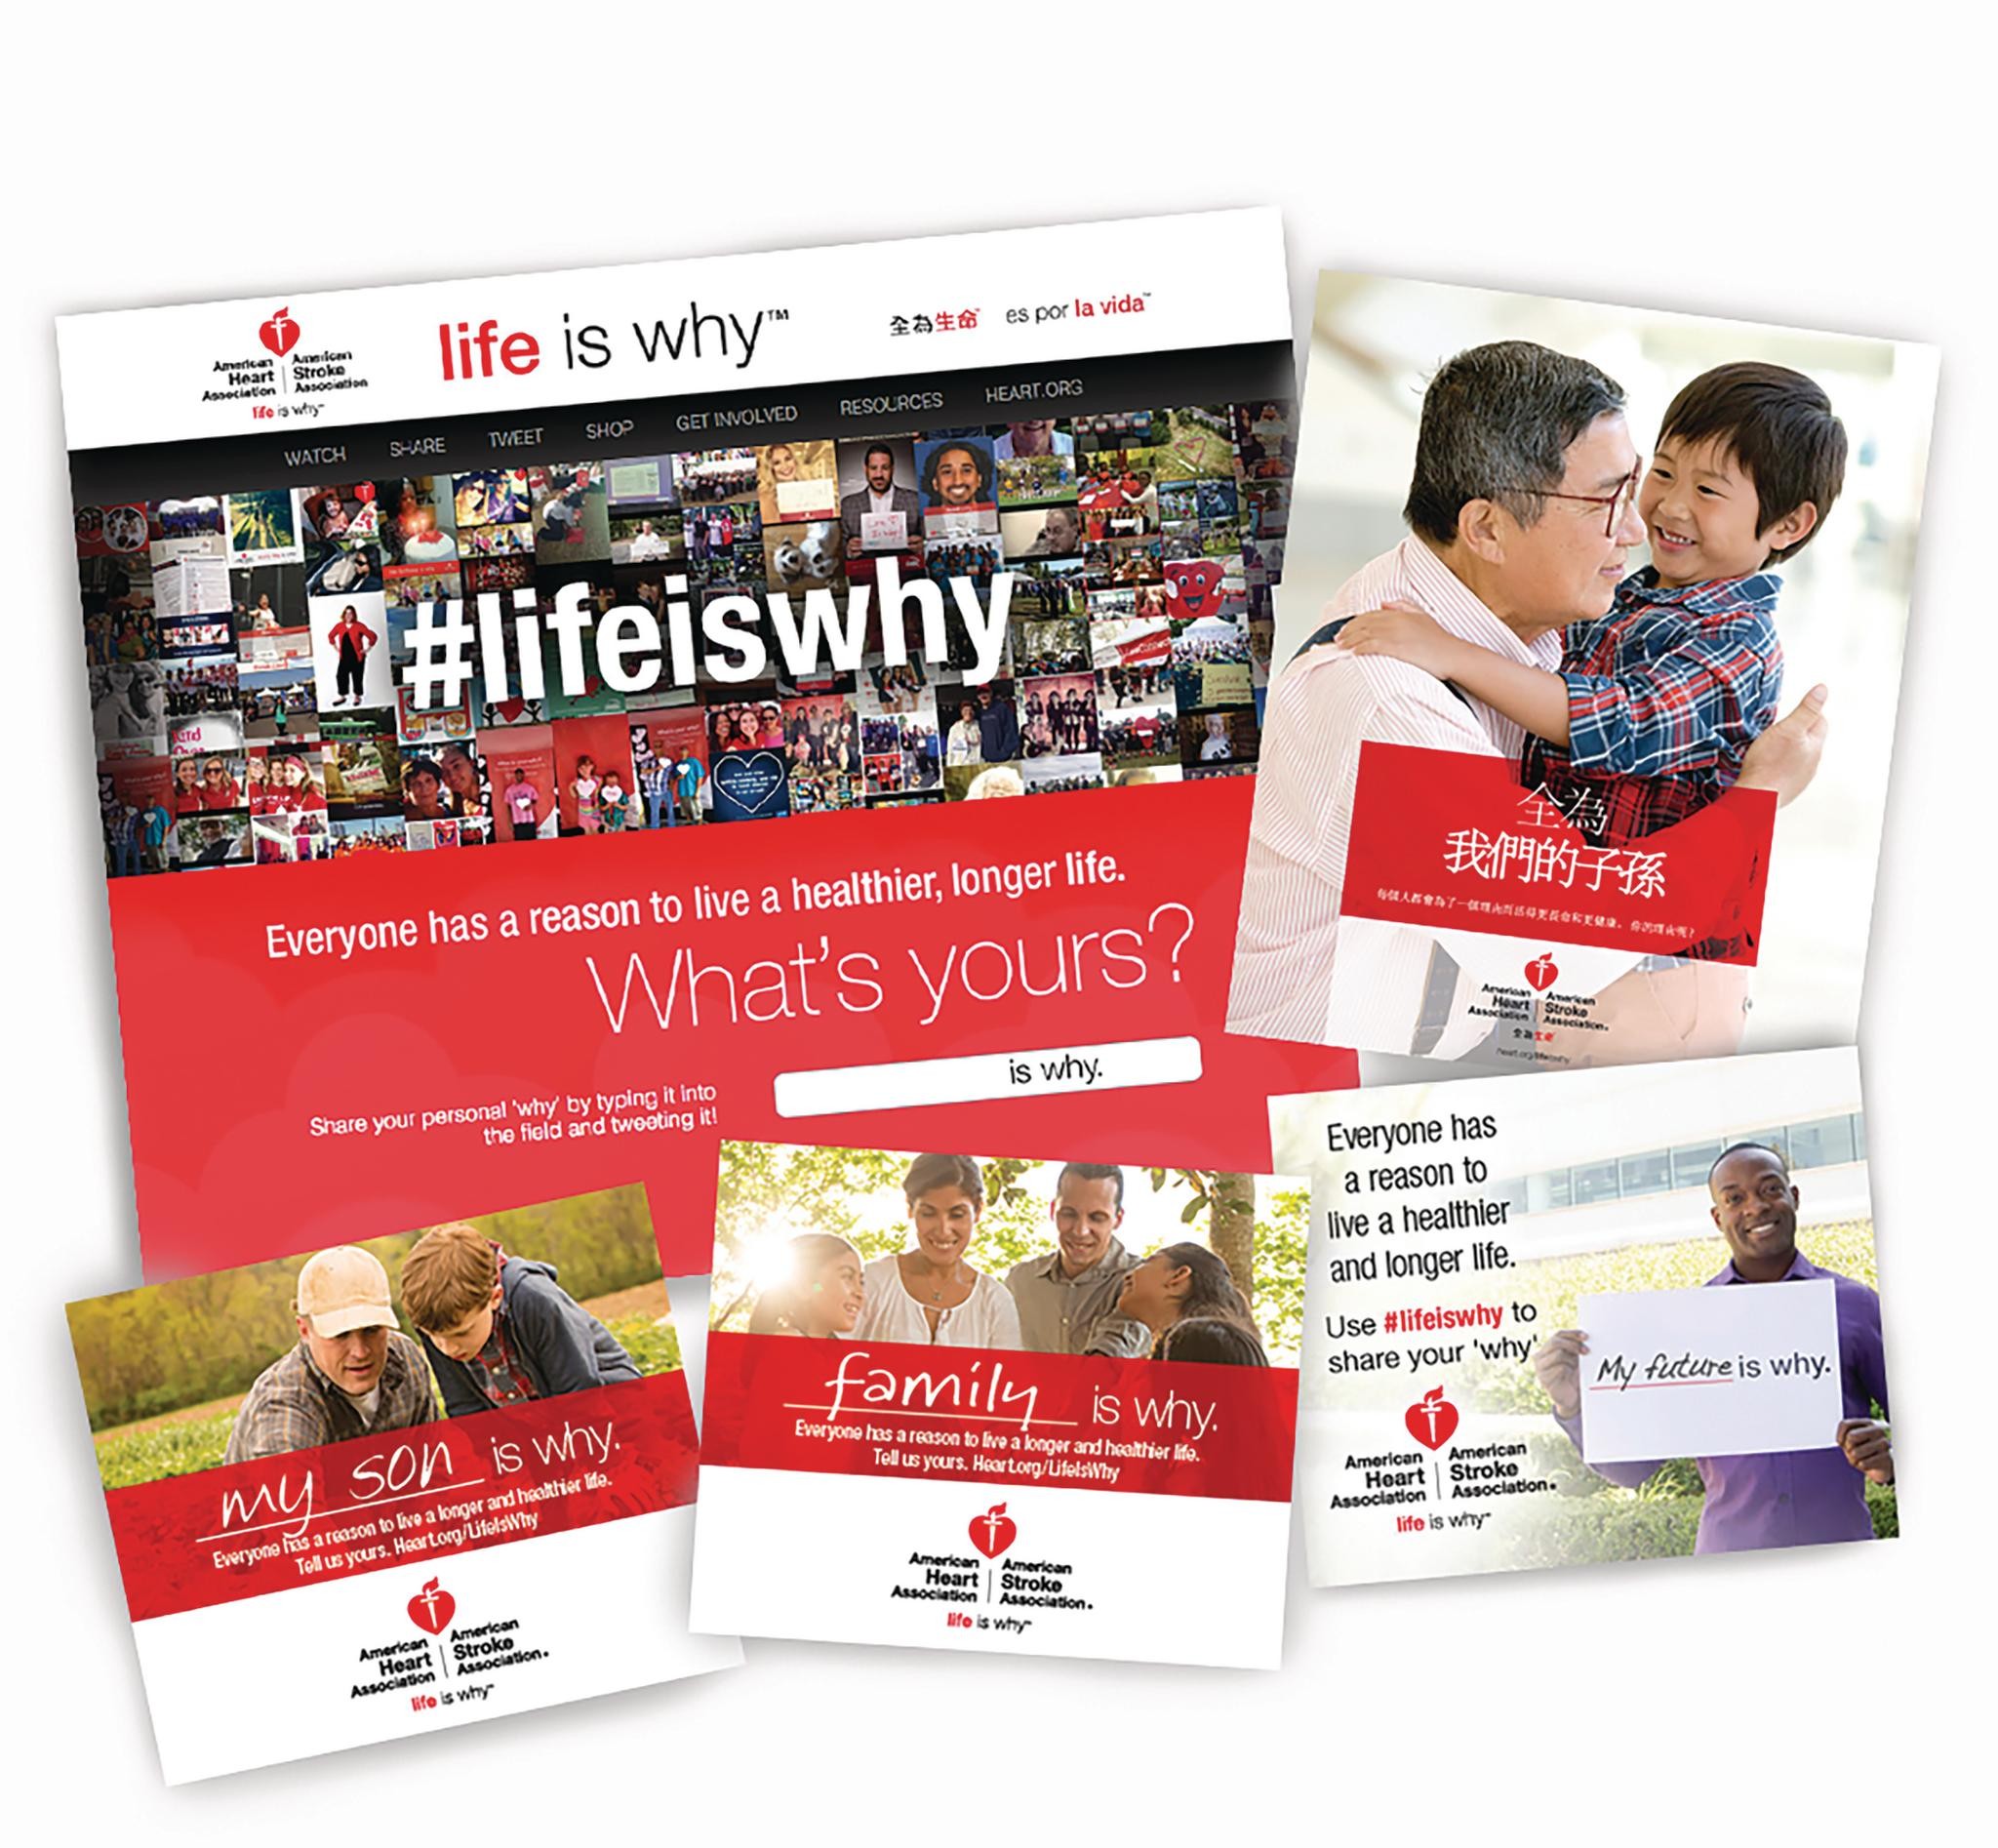 AMERICAN HEART ASSOCIATION NEW BRANDING - LIFE IS WHY